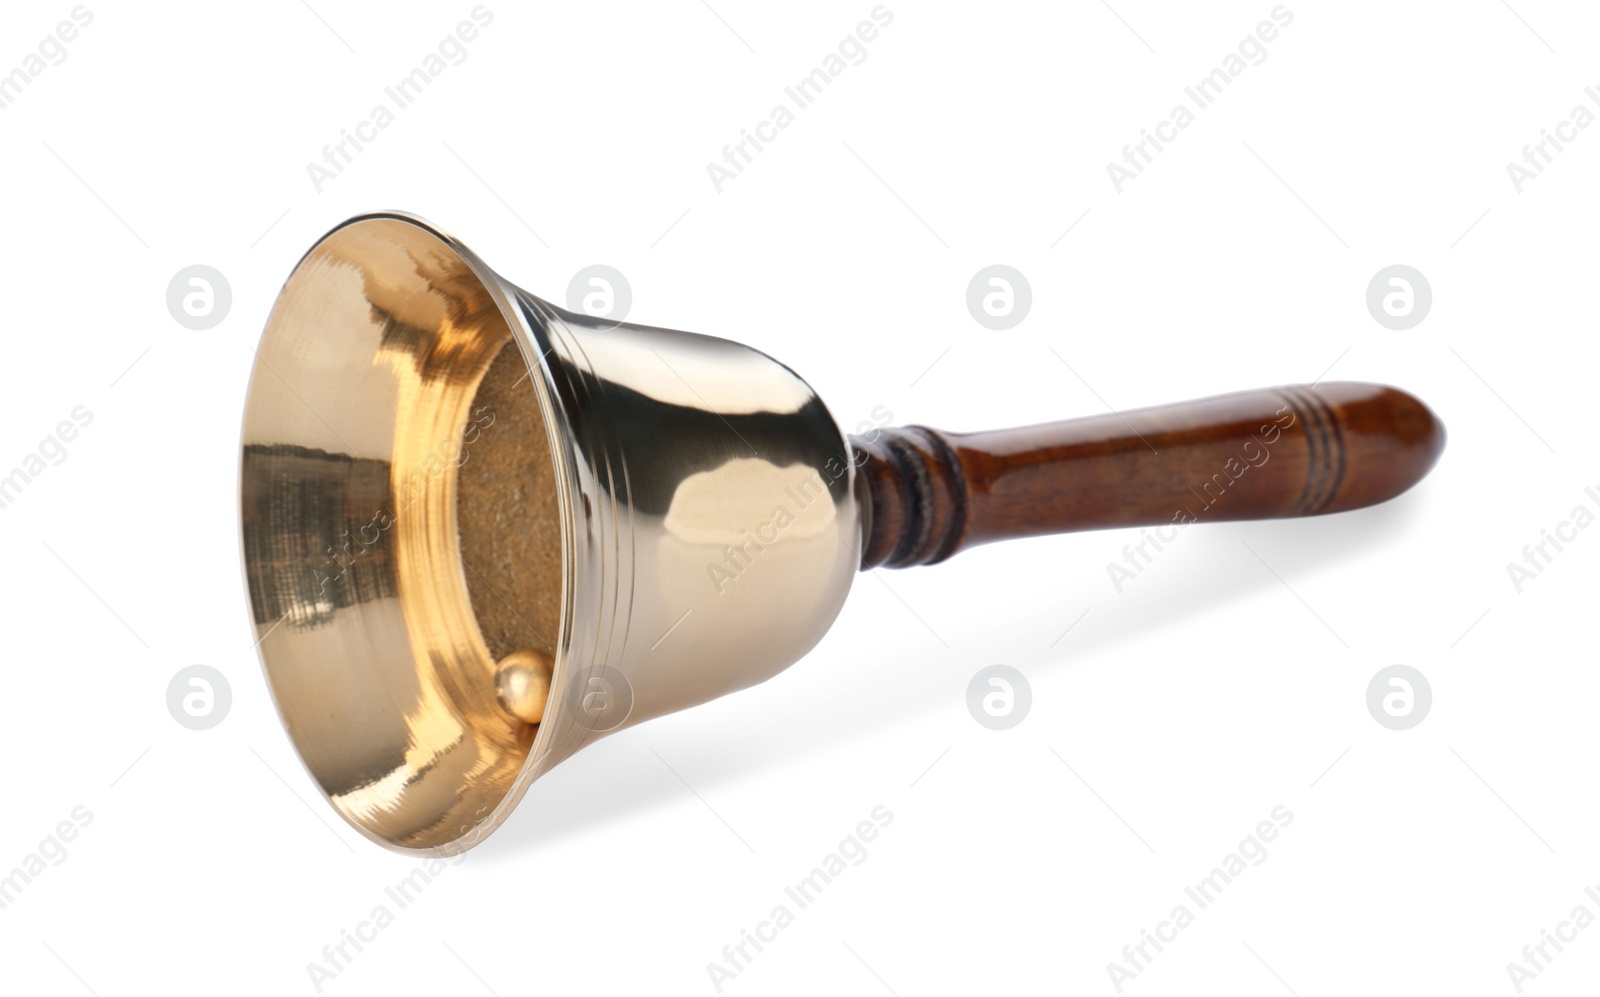 Photo of Golden school bell with wooden handle isolated on white